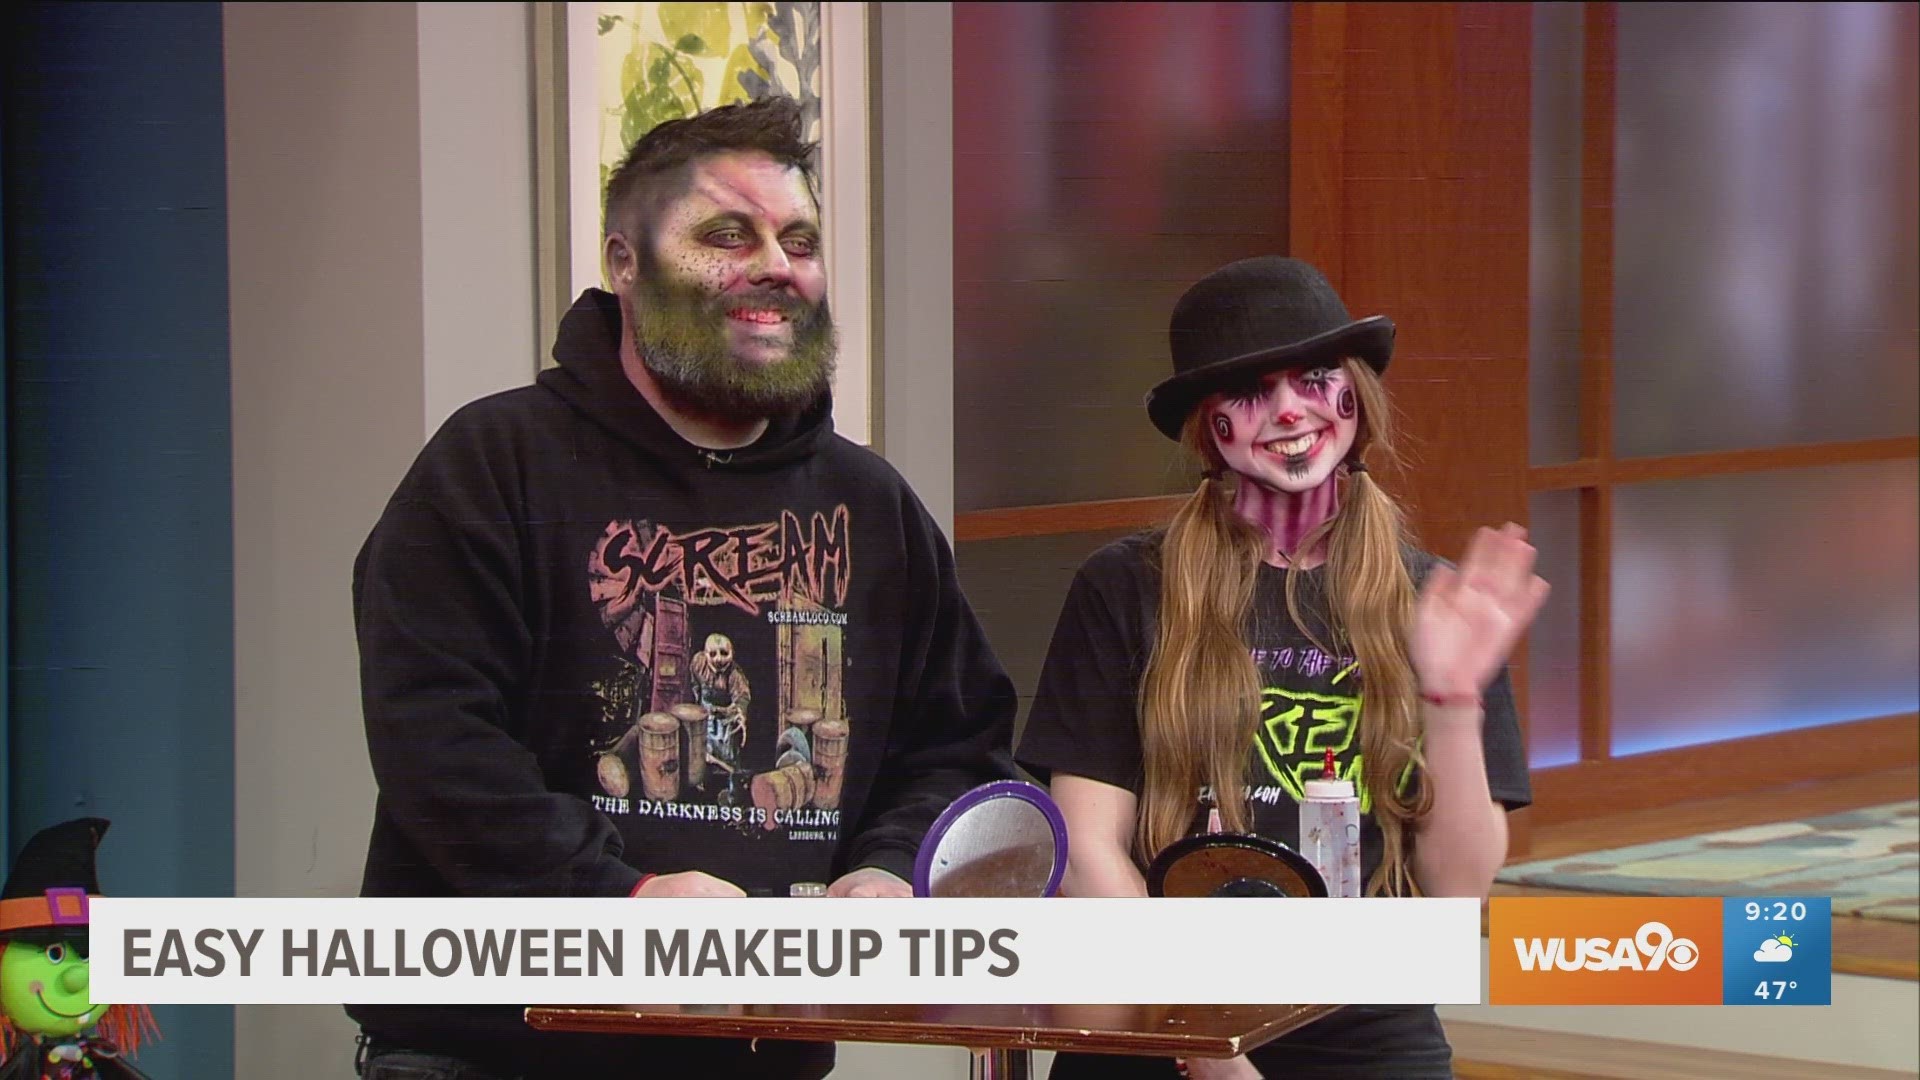 Kenny Strader and Autumn Mills from Scream Loco show how to rock Halloween makeup from everyday items.